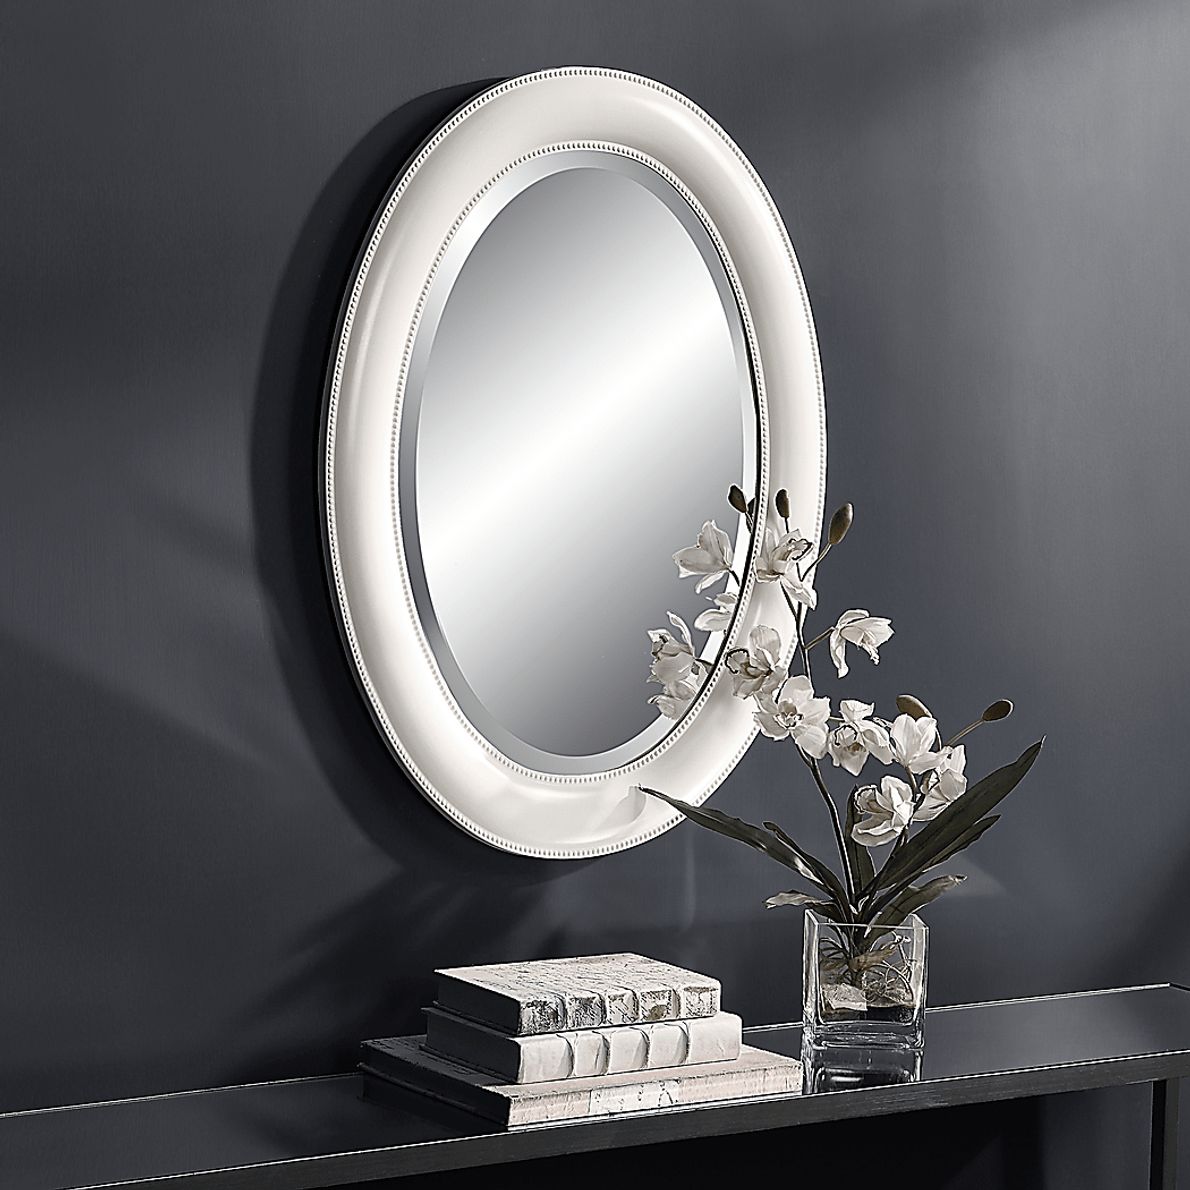 Sommerall White Mirror